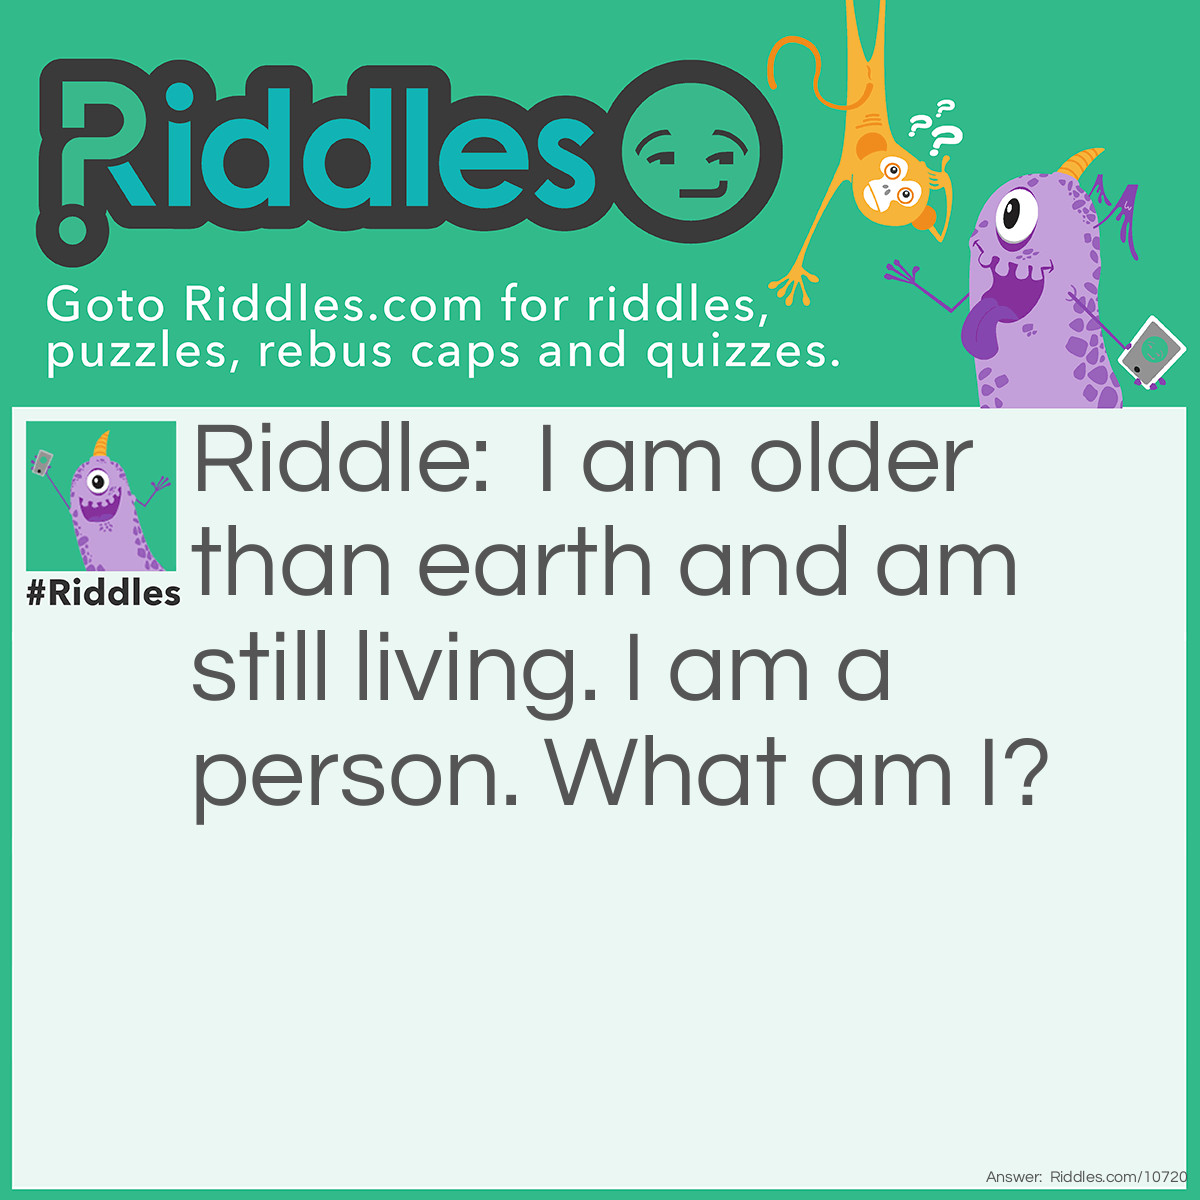 Riddle: I am older than earth and am still living. I am a person. What am I? Answer: A Liar.